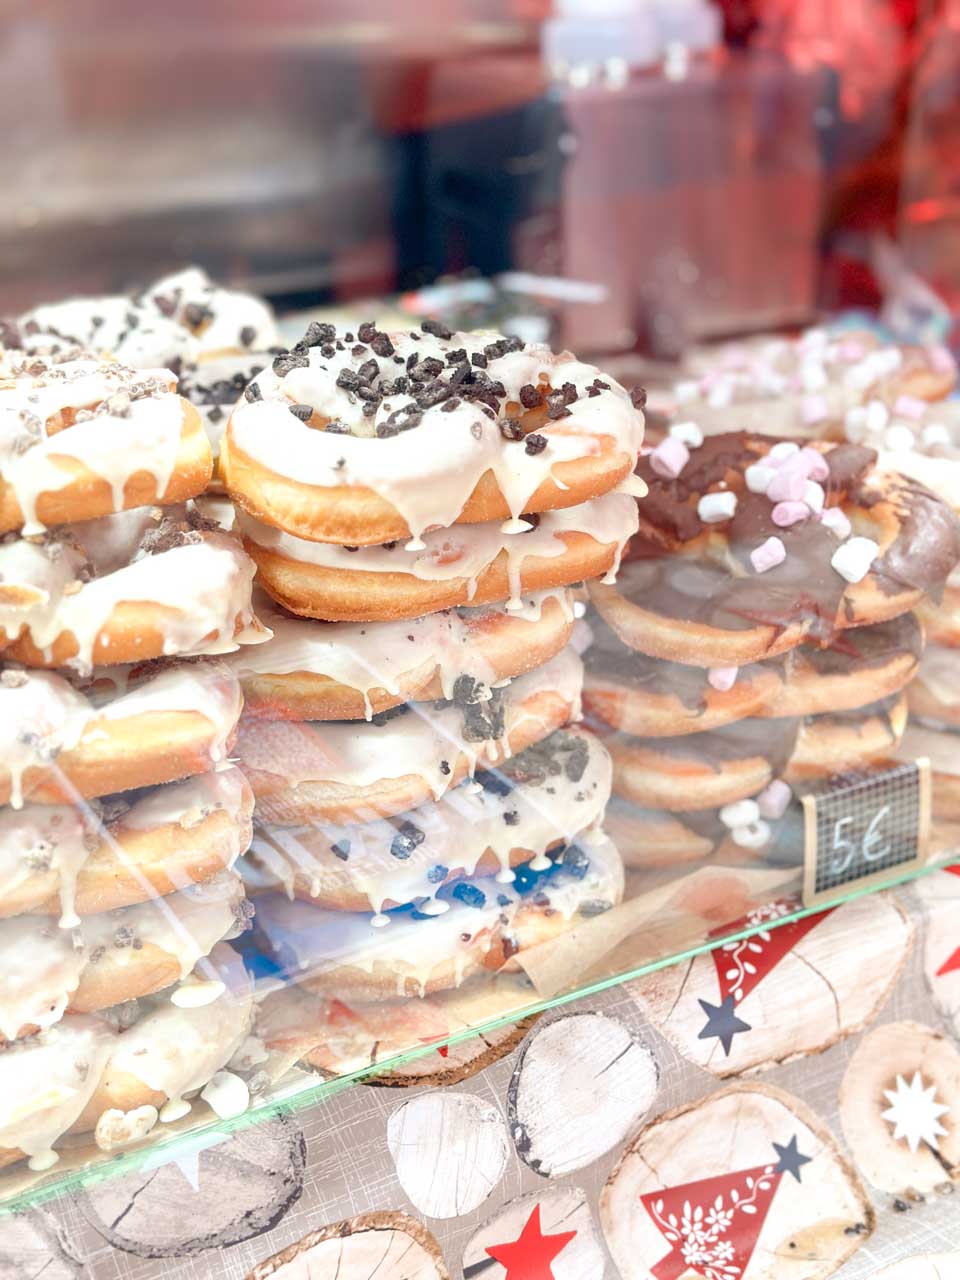 A display of glazed pretzel-shaped donuts with various toppings, including chocolate sprinkles and mini marshmallows at a Christmas market in Colmar